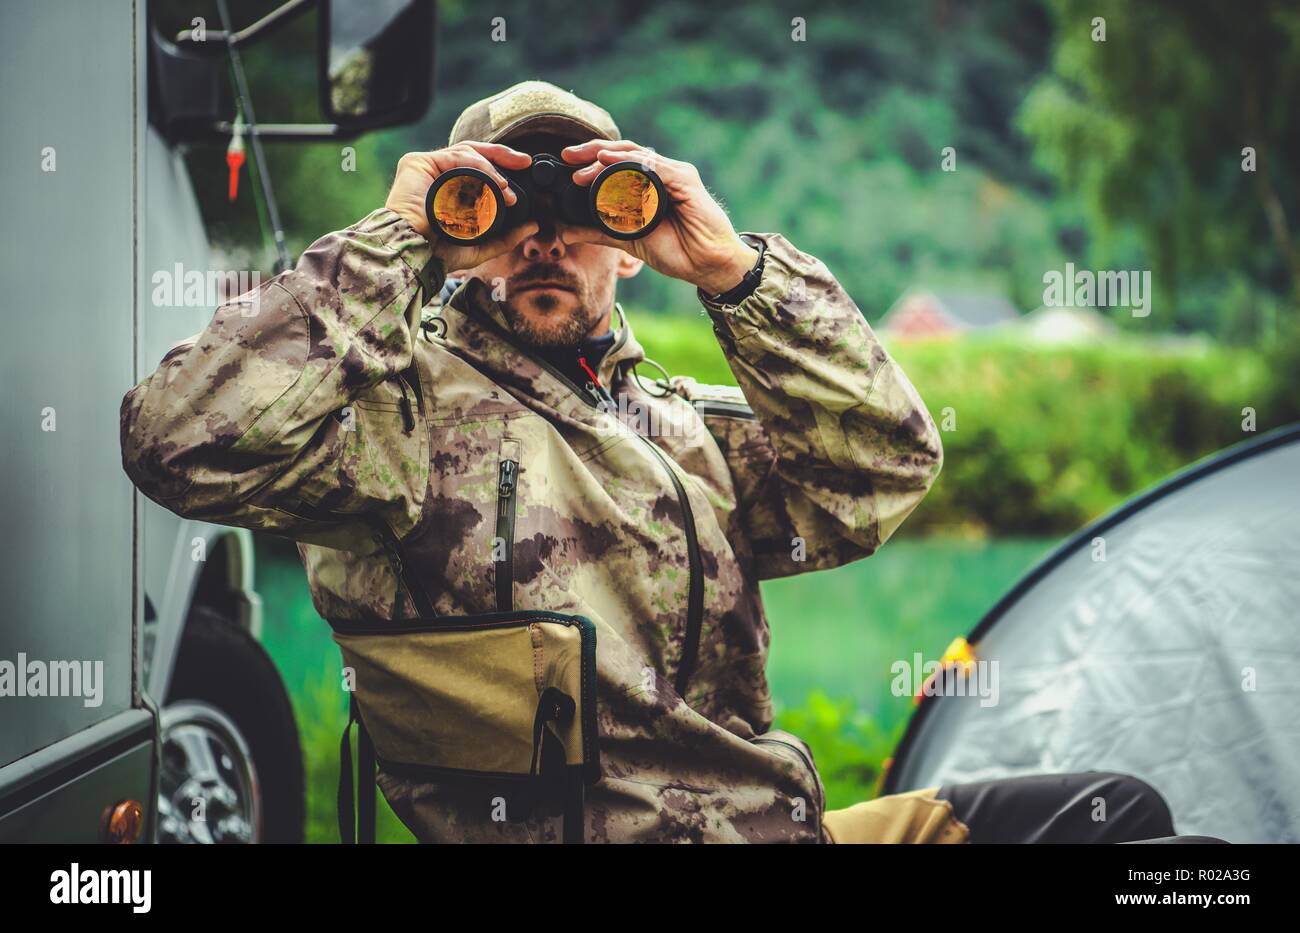 Hunting Season Game Spotting. Caucasian Hunter with Binoculars and the Campsite in Background. Stock Photo